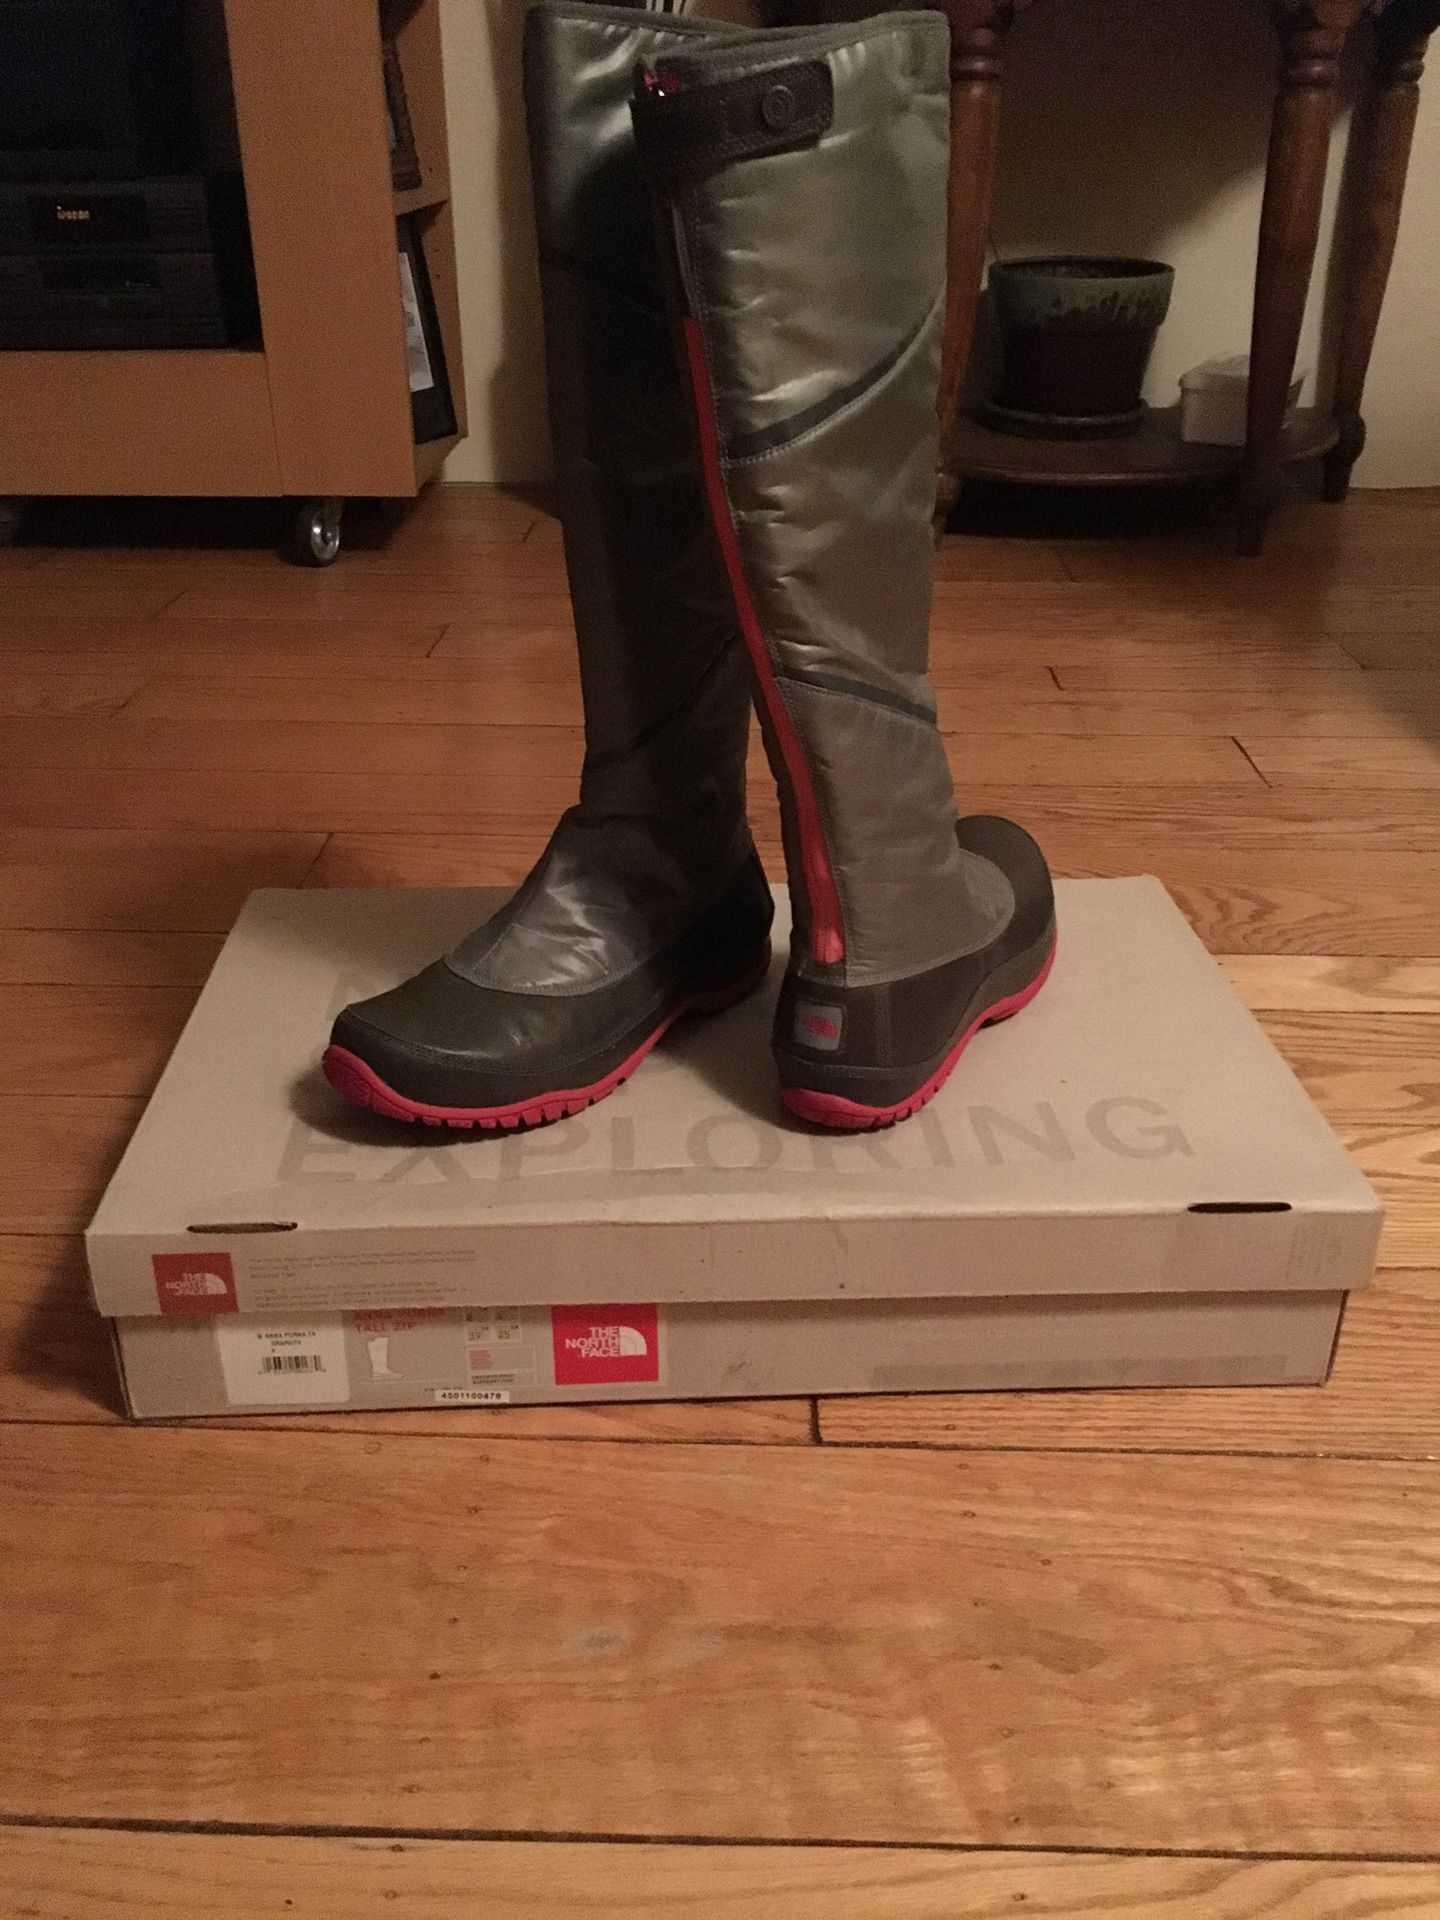 North face insulated boots